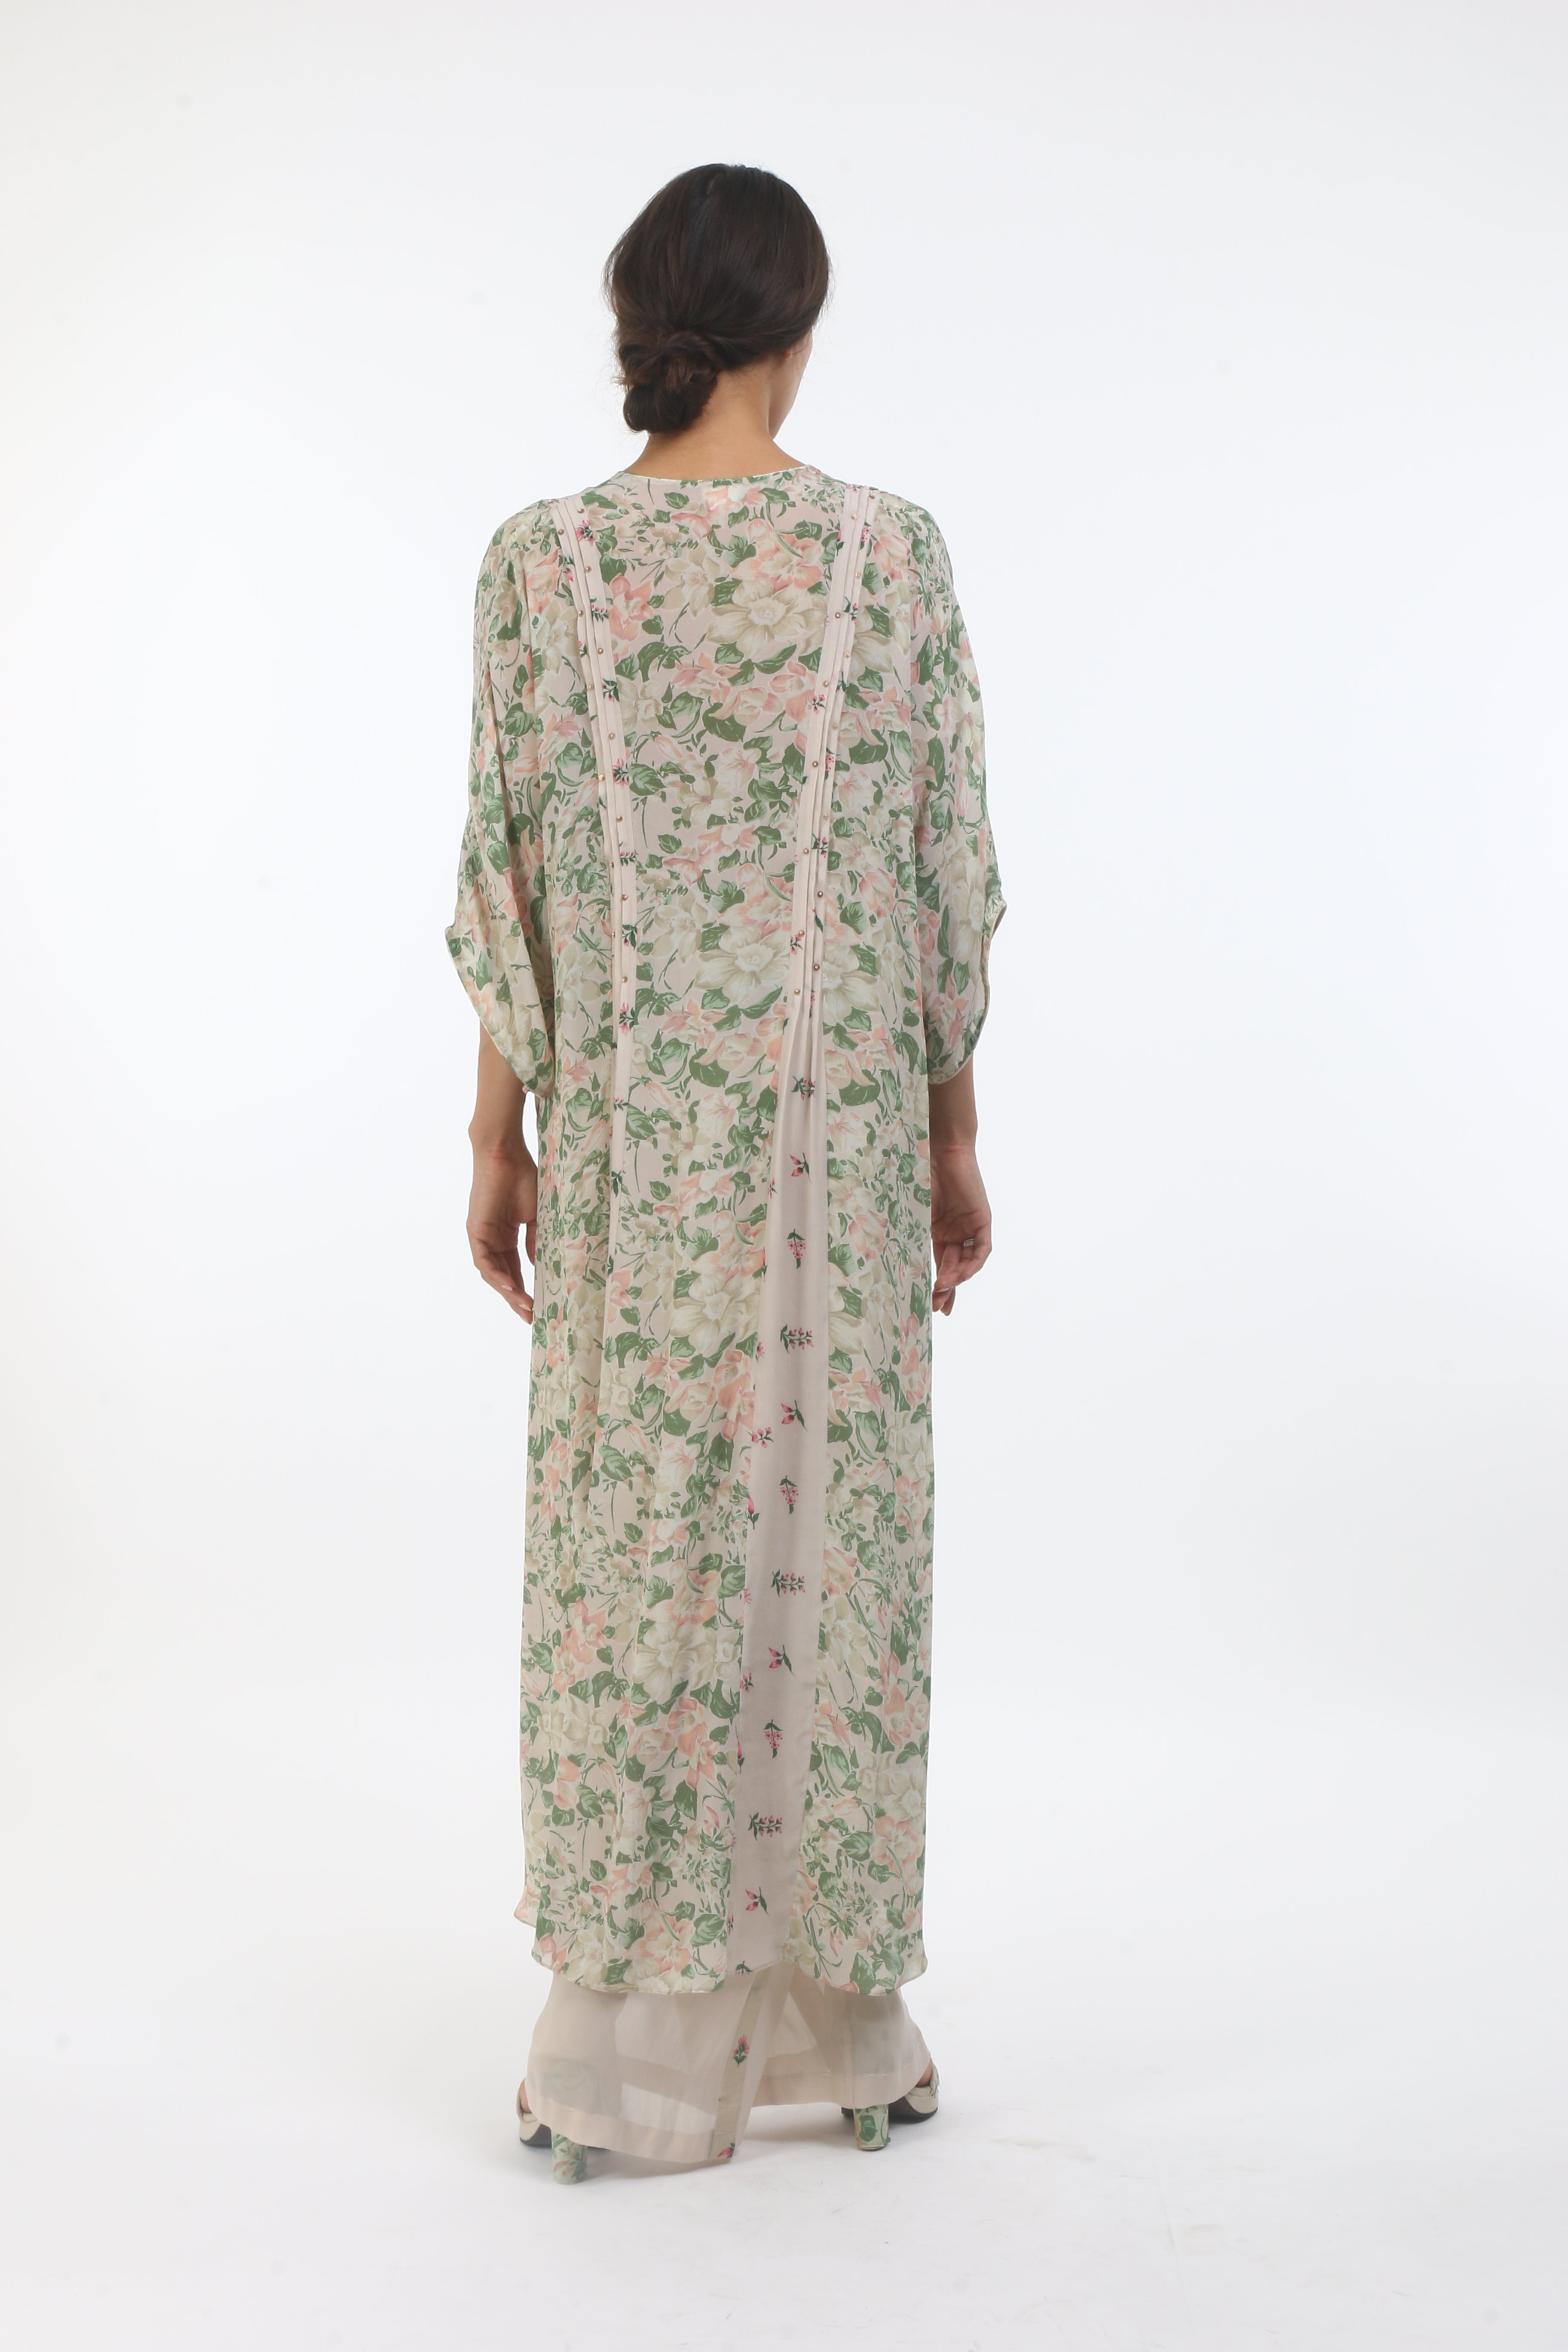 Bloom beige grey bibi jaal printed crepe kaftan with bouquet printed panels & pin tuck details, paired with a pair of straight pants with printed side panels.